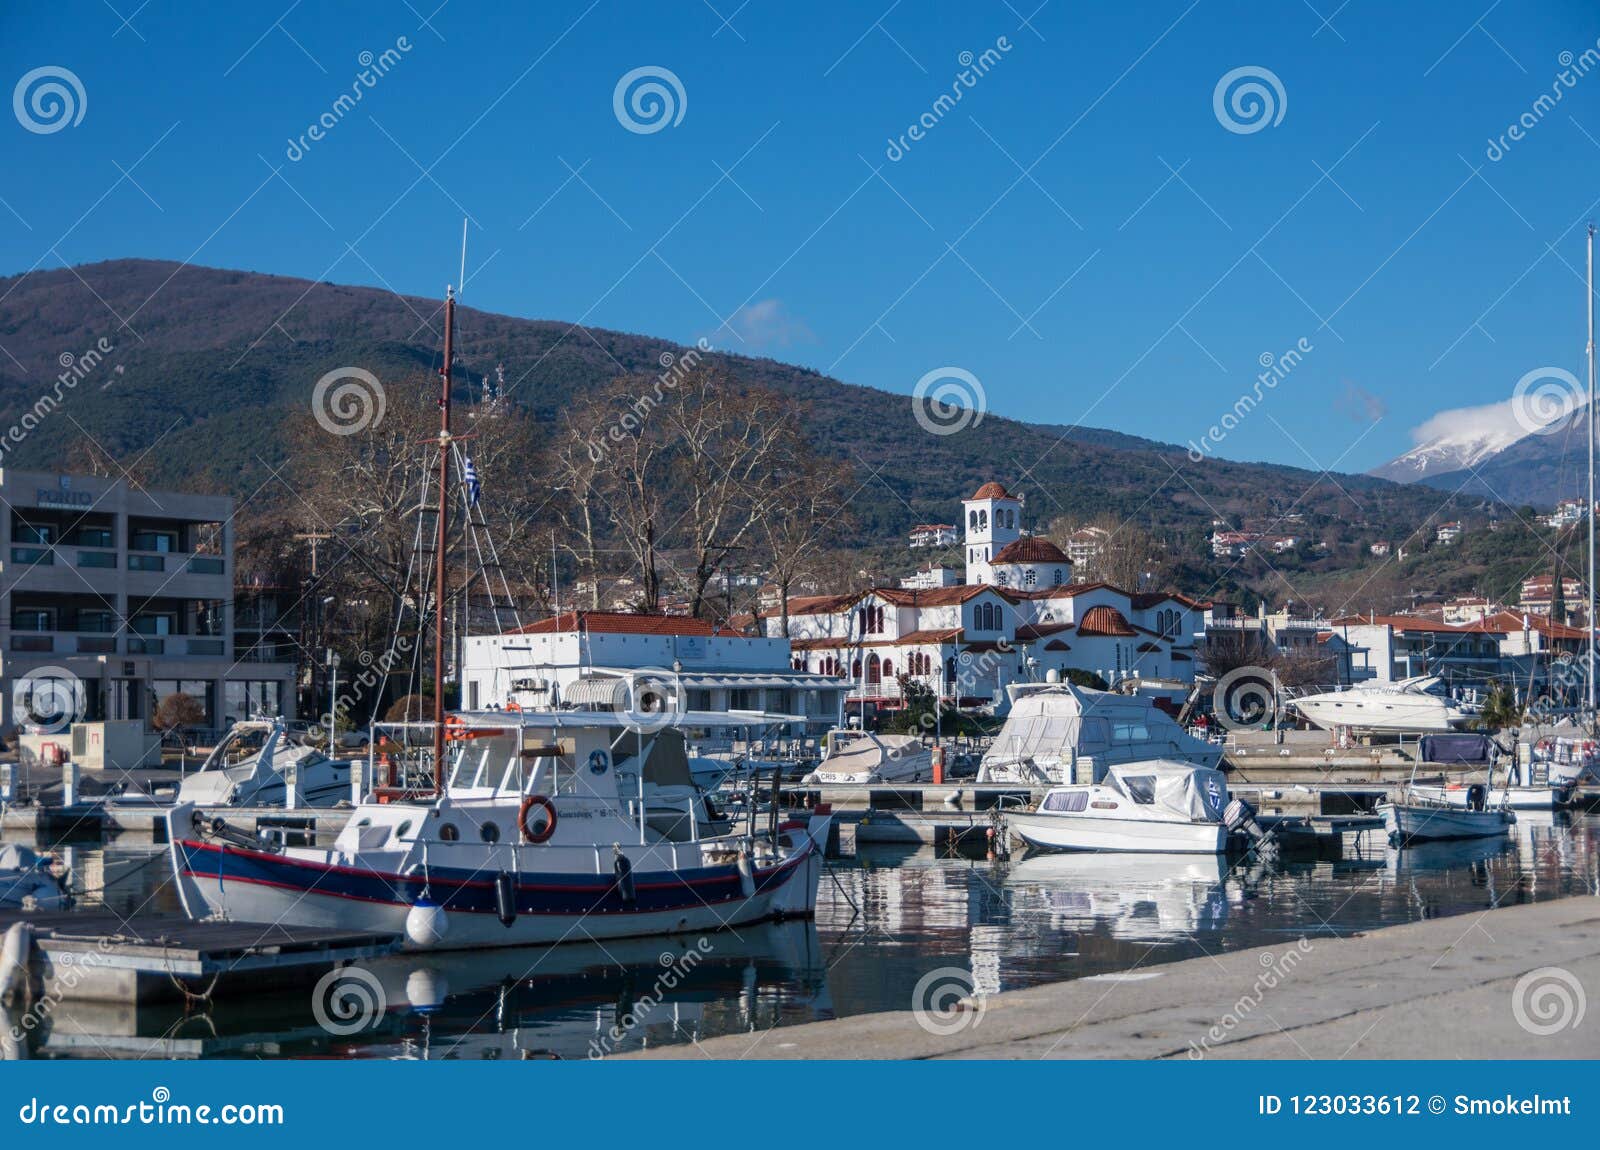 Harbor with Boats and Fishing Schooners. Platamonas Greek is Editorial ...